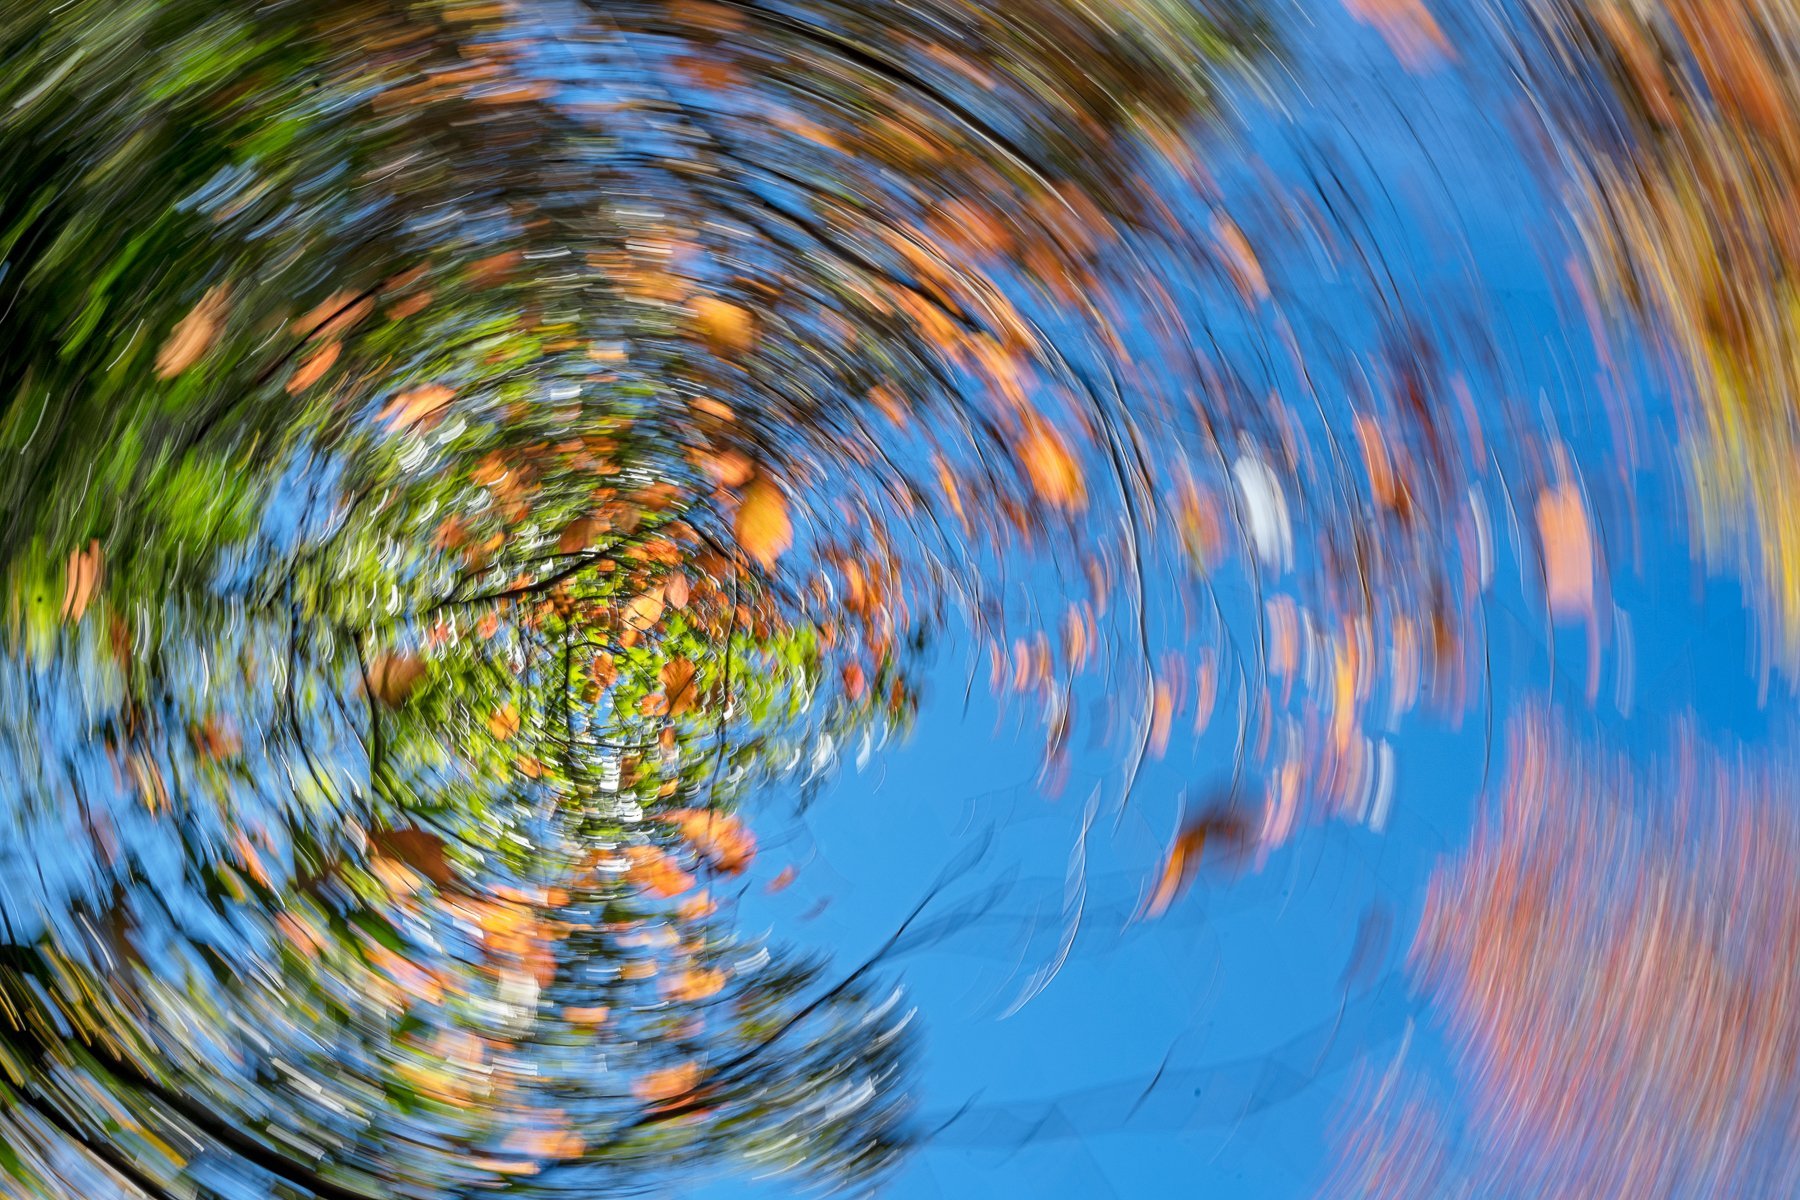 Fall Vortex with Falling Leaves2938.jpg